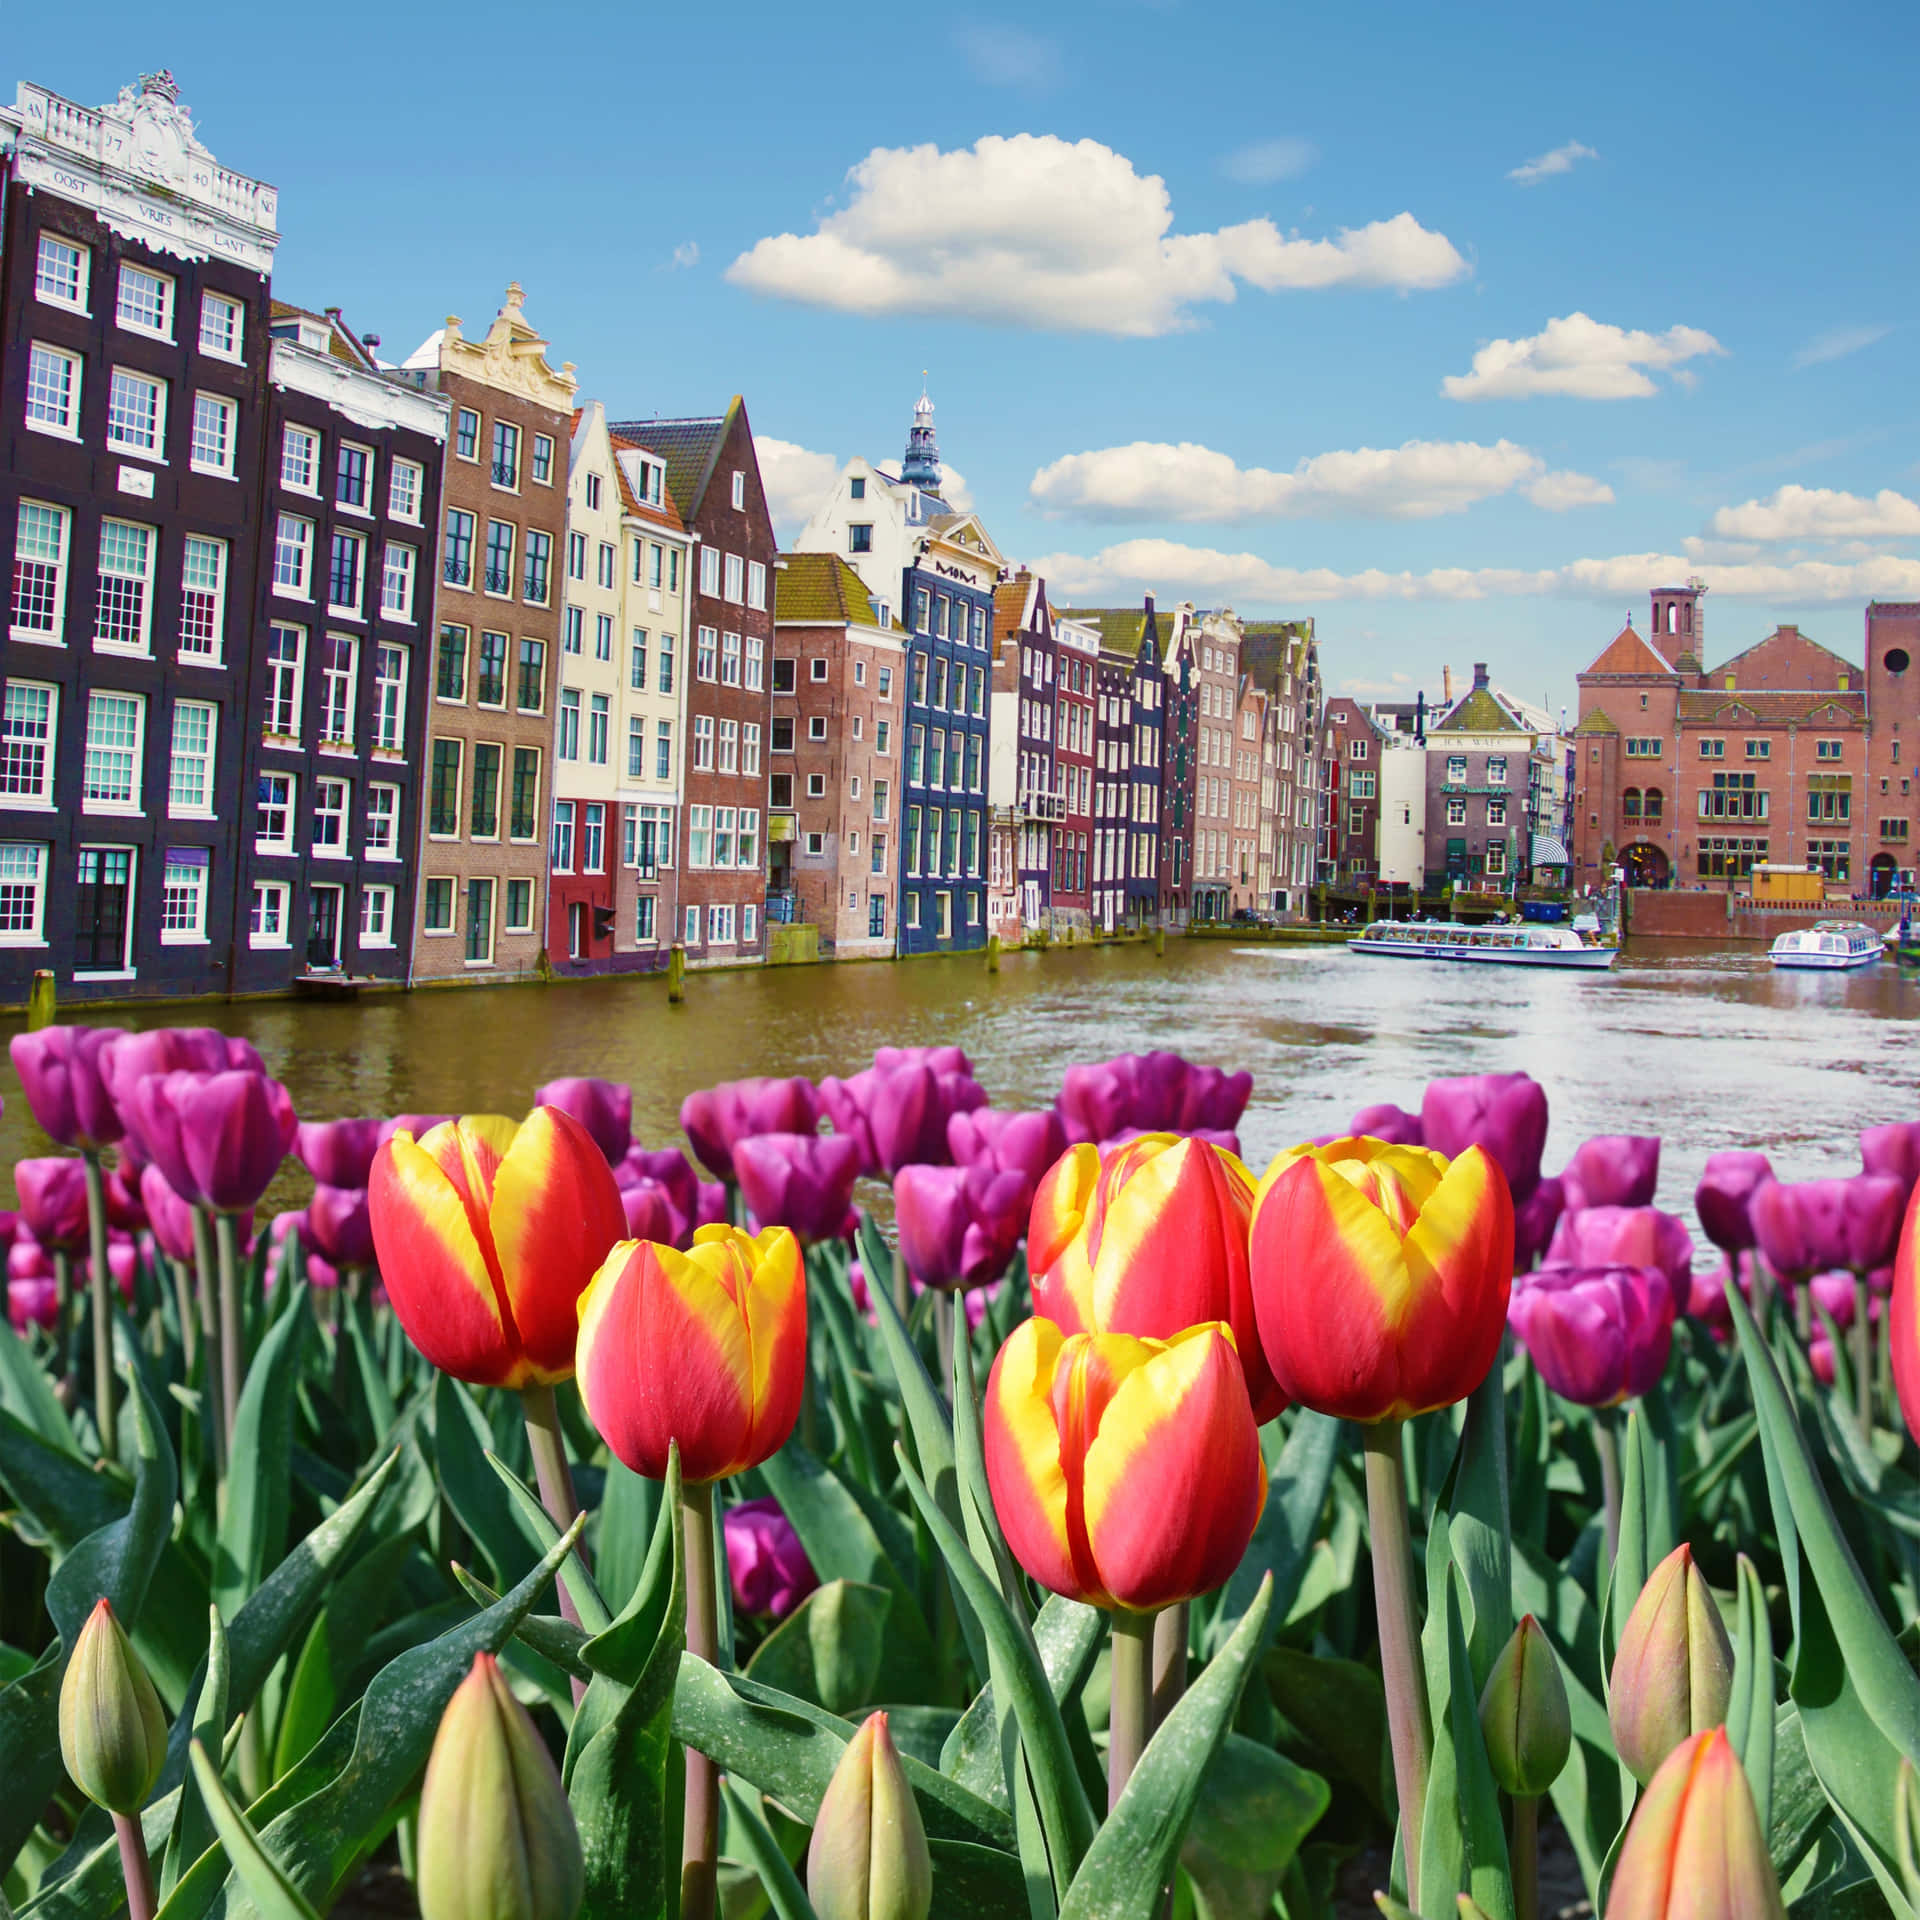 A City With Buildings And Tulips Wallpaper